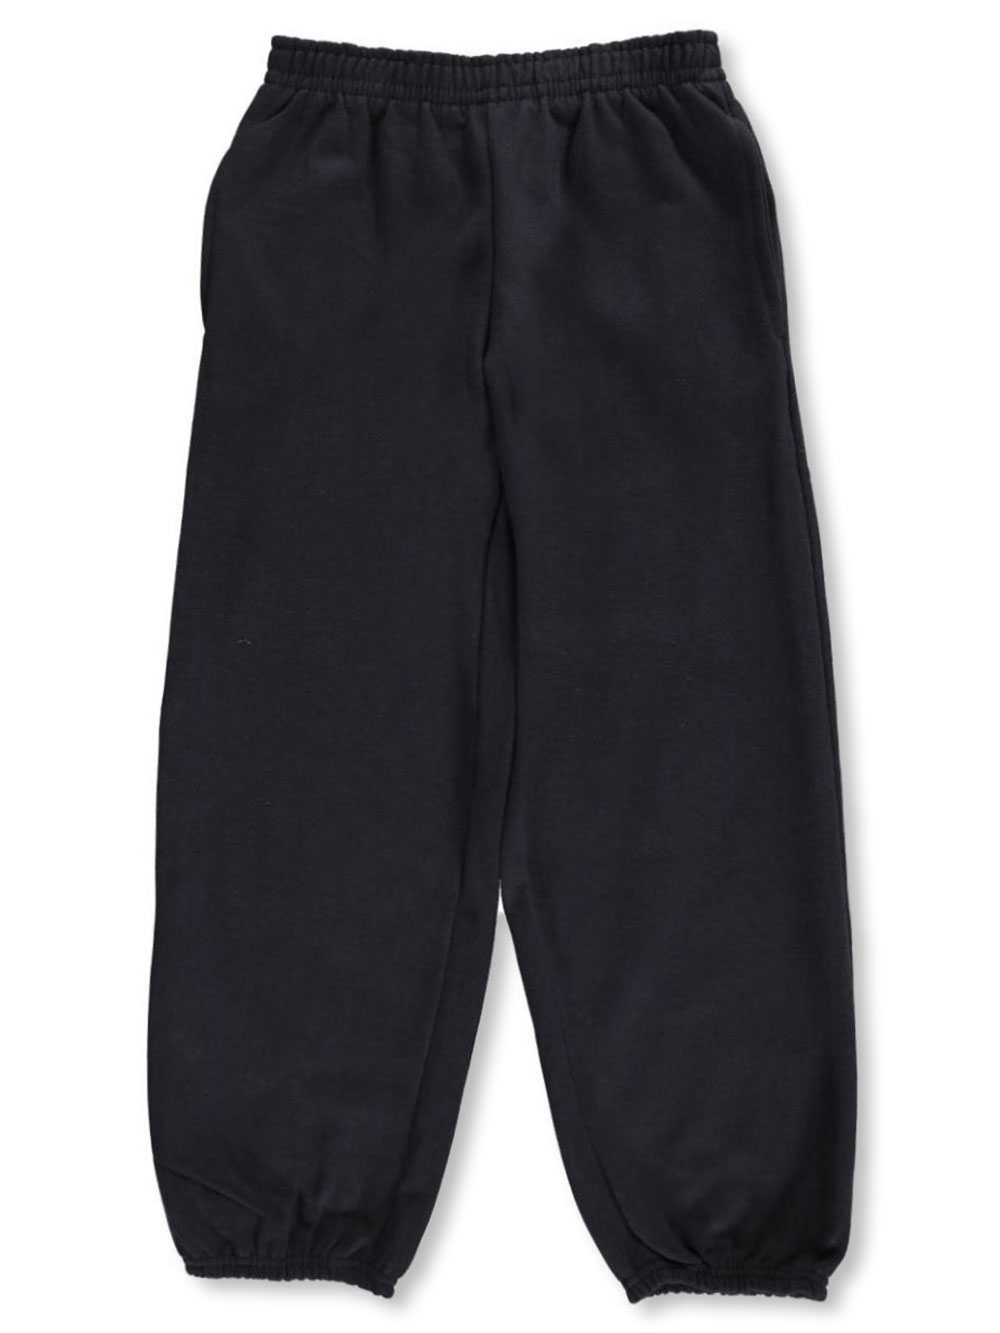 Size 8-10 Sweatpants for Boys